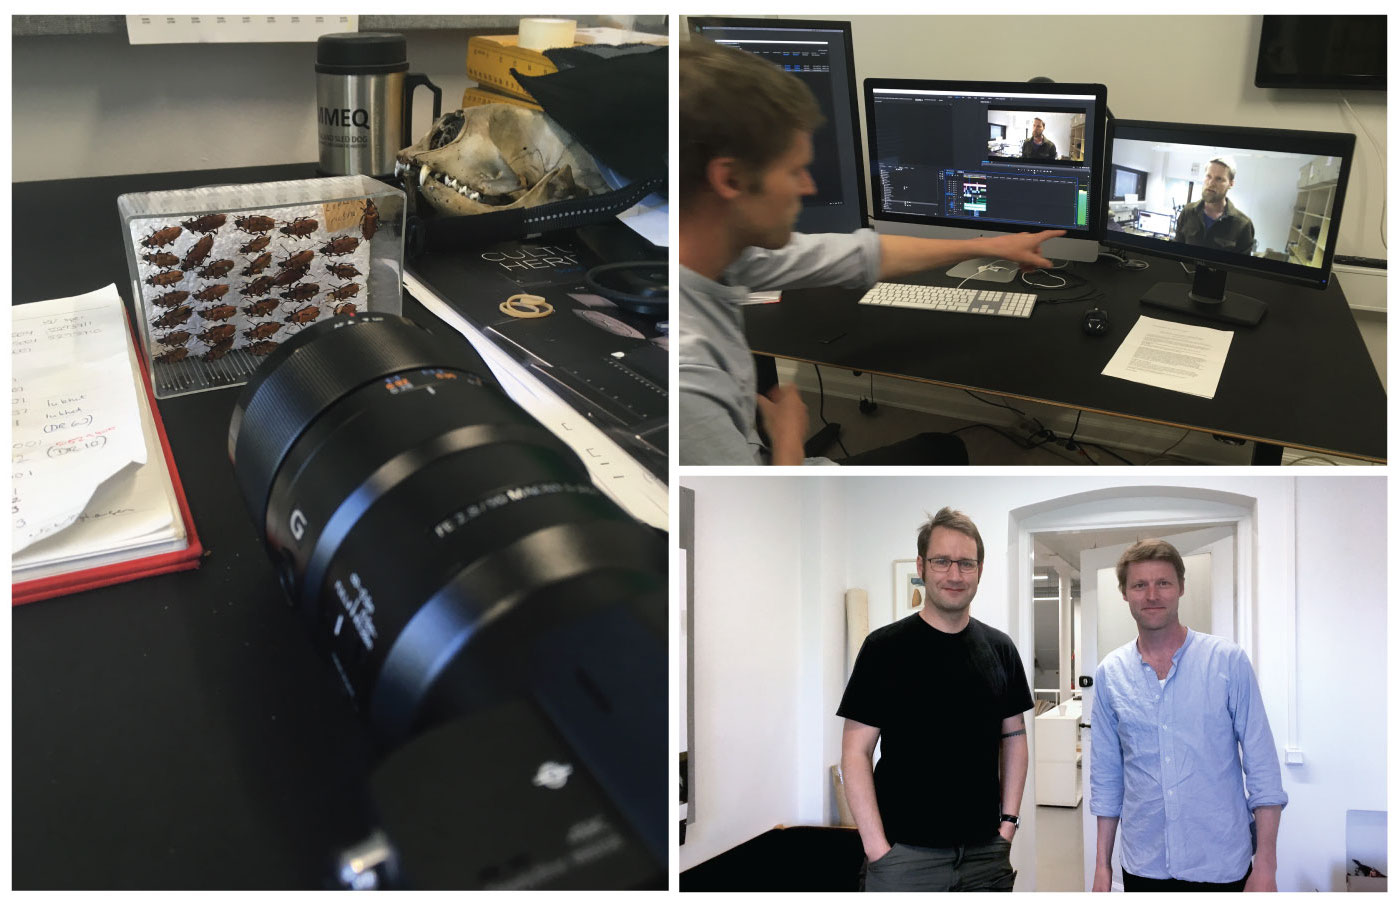 Optimizing image capture (right). Anders showing a video being made about the digitation efforts at the digitization facility at Sertifer in Joensuu, Finland (top left). Matin Stein and Anders Drud Jordan in their office at University of Copenhagen Campus (bottom left).